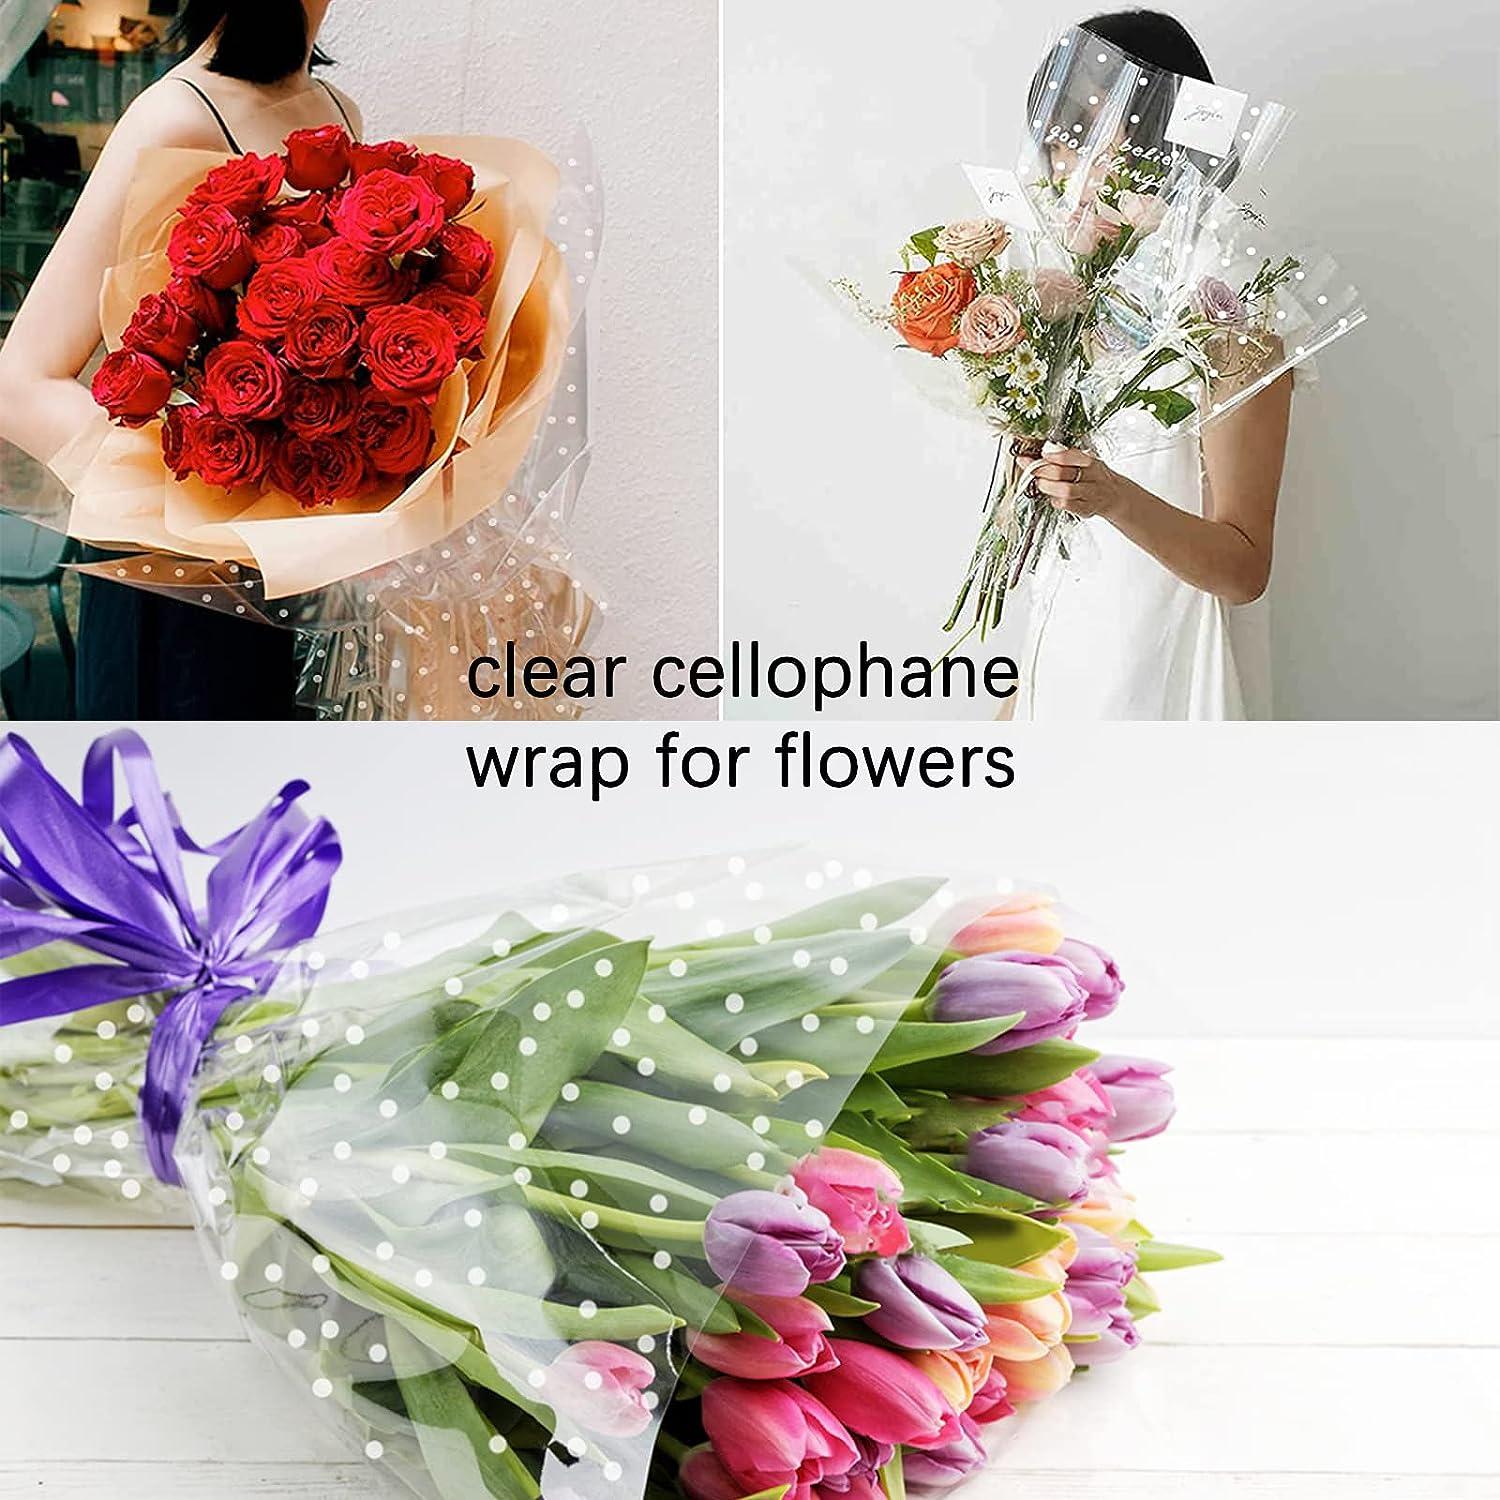 10pcs Valentine's Day LOVE Flower Gift Wrapping Paper